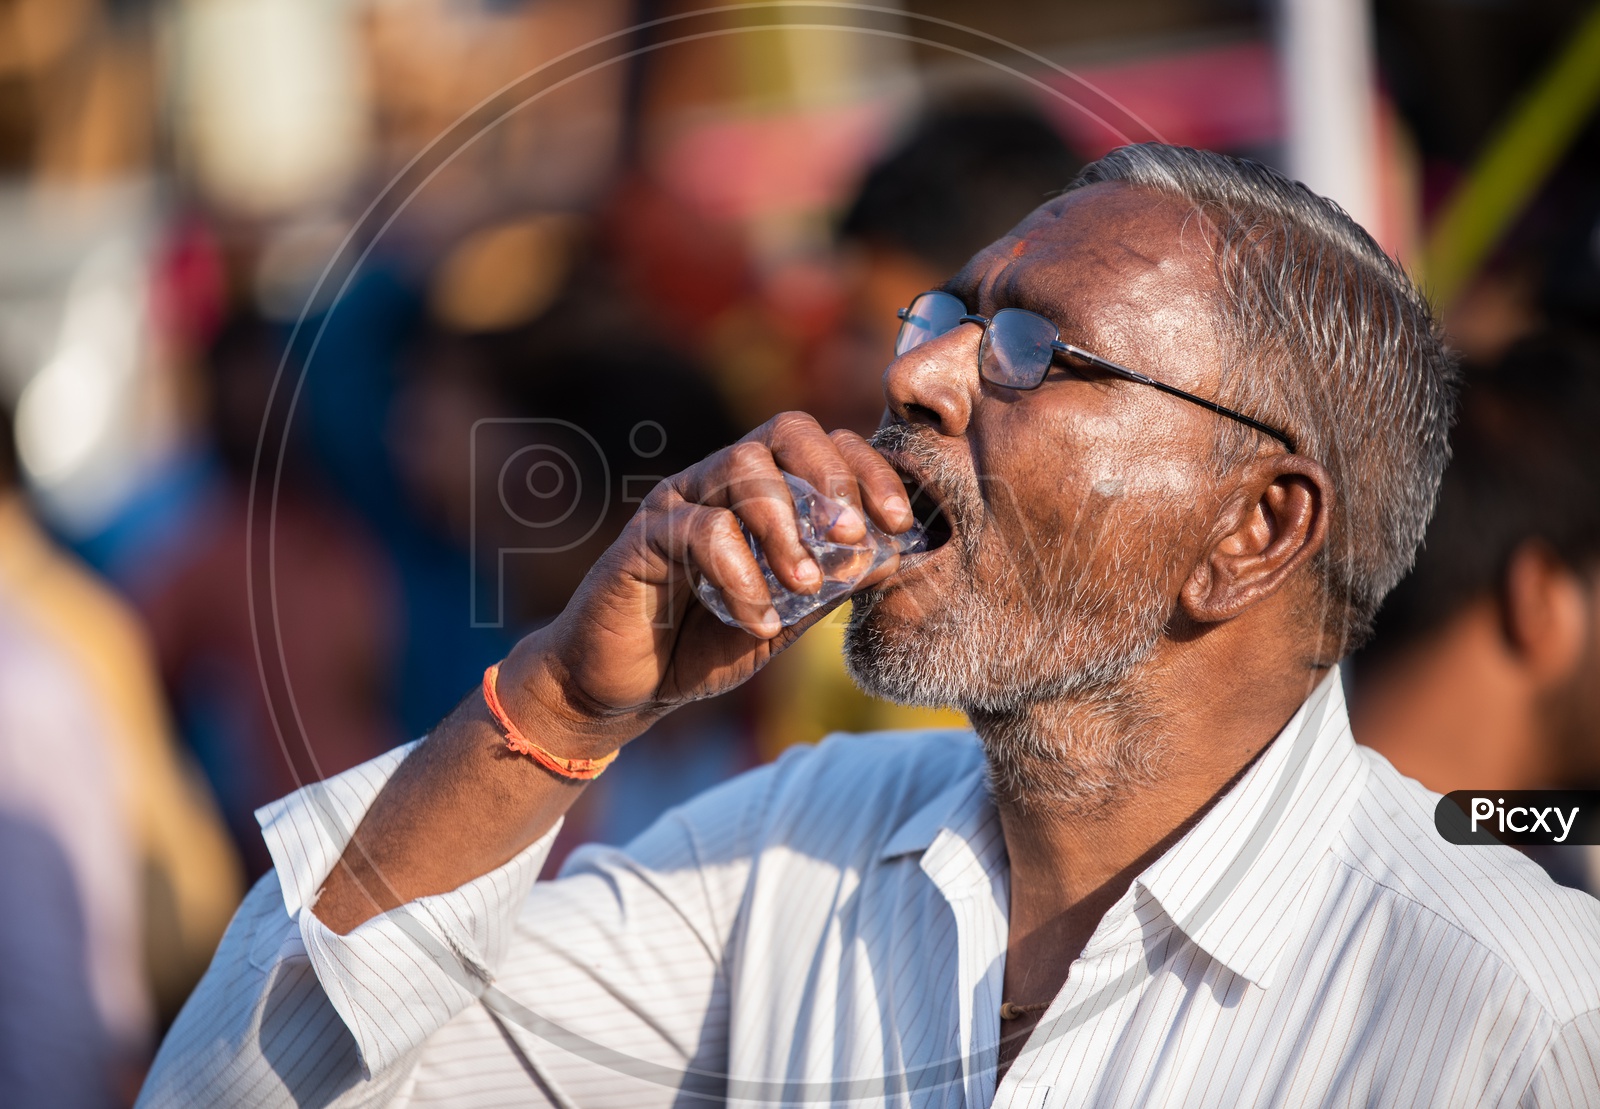 A man consuming plastic packaged drinking water on a hot summer day